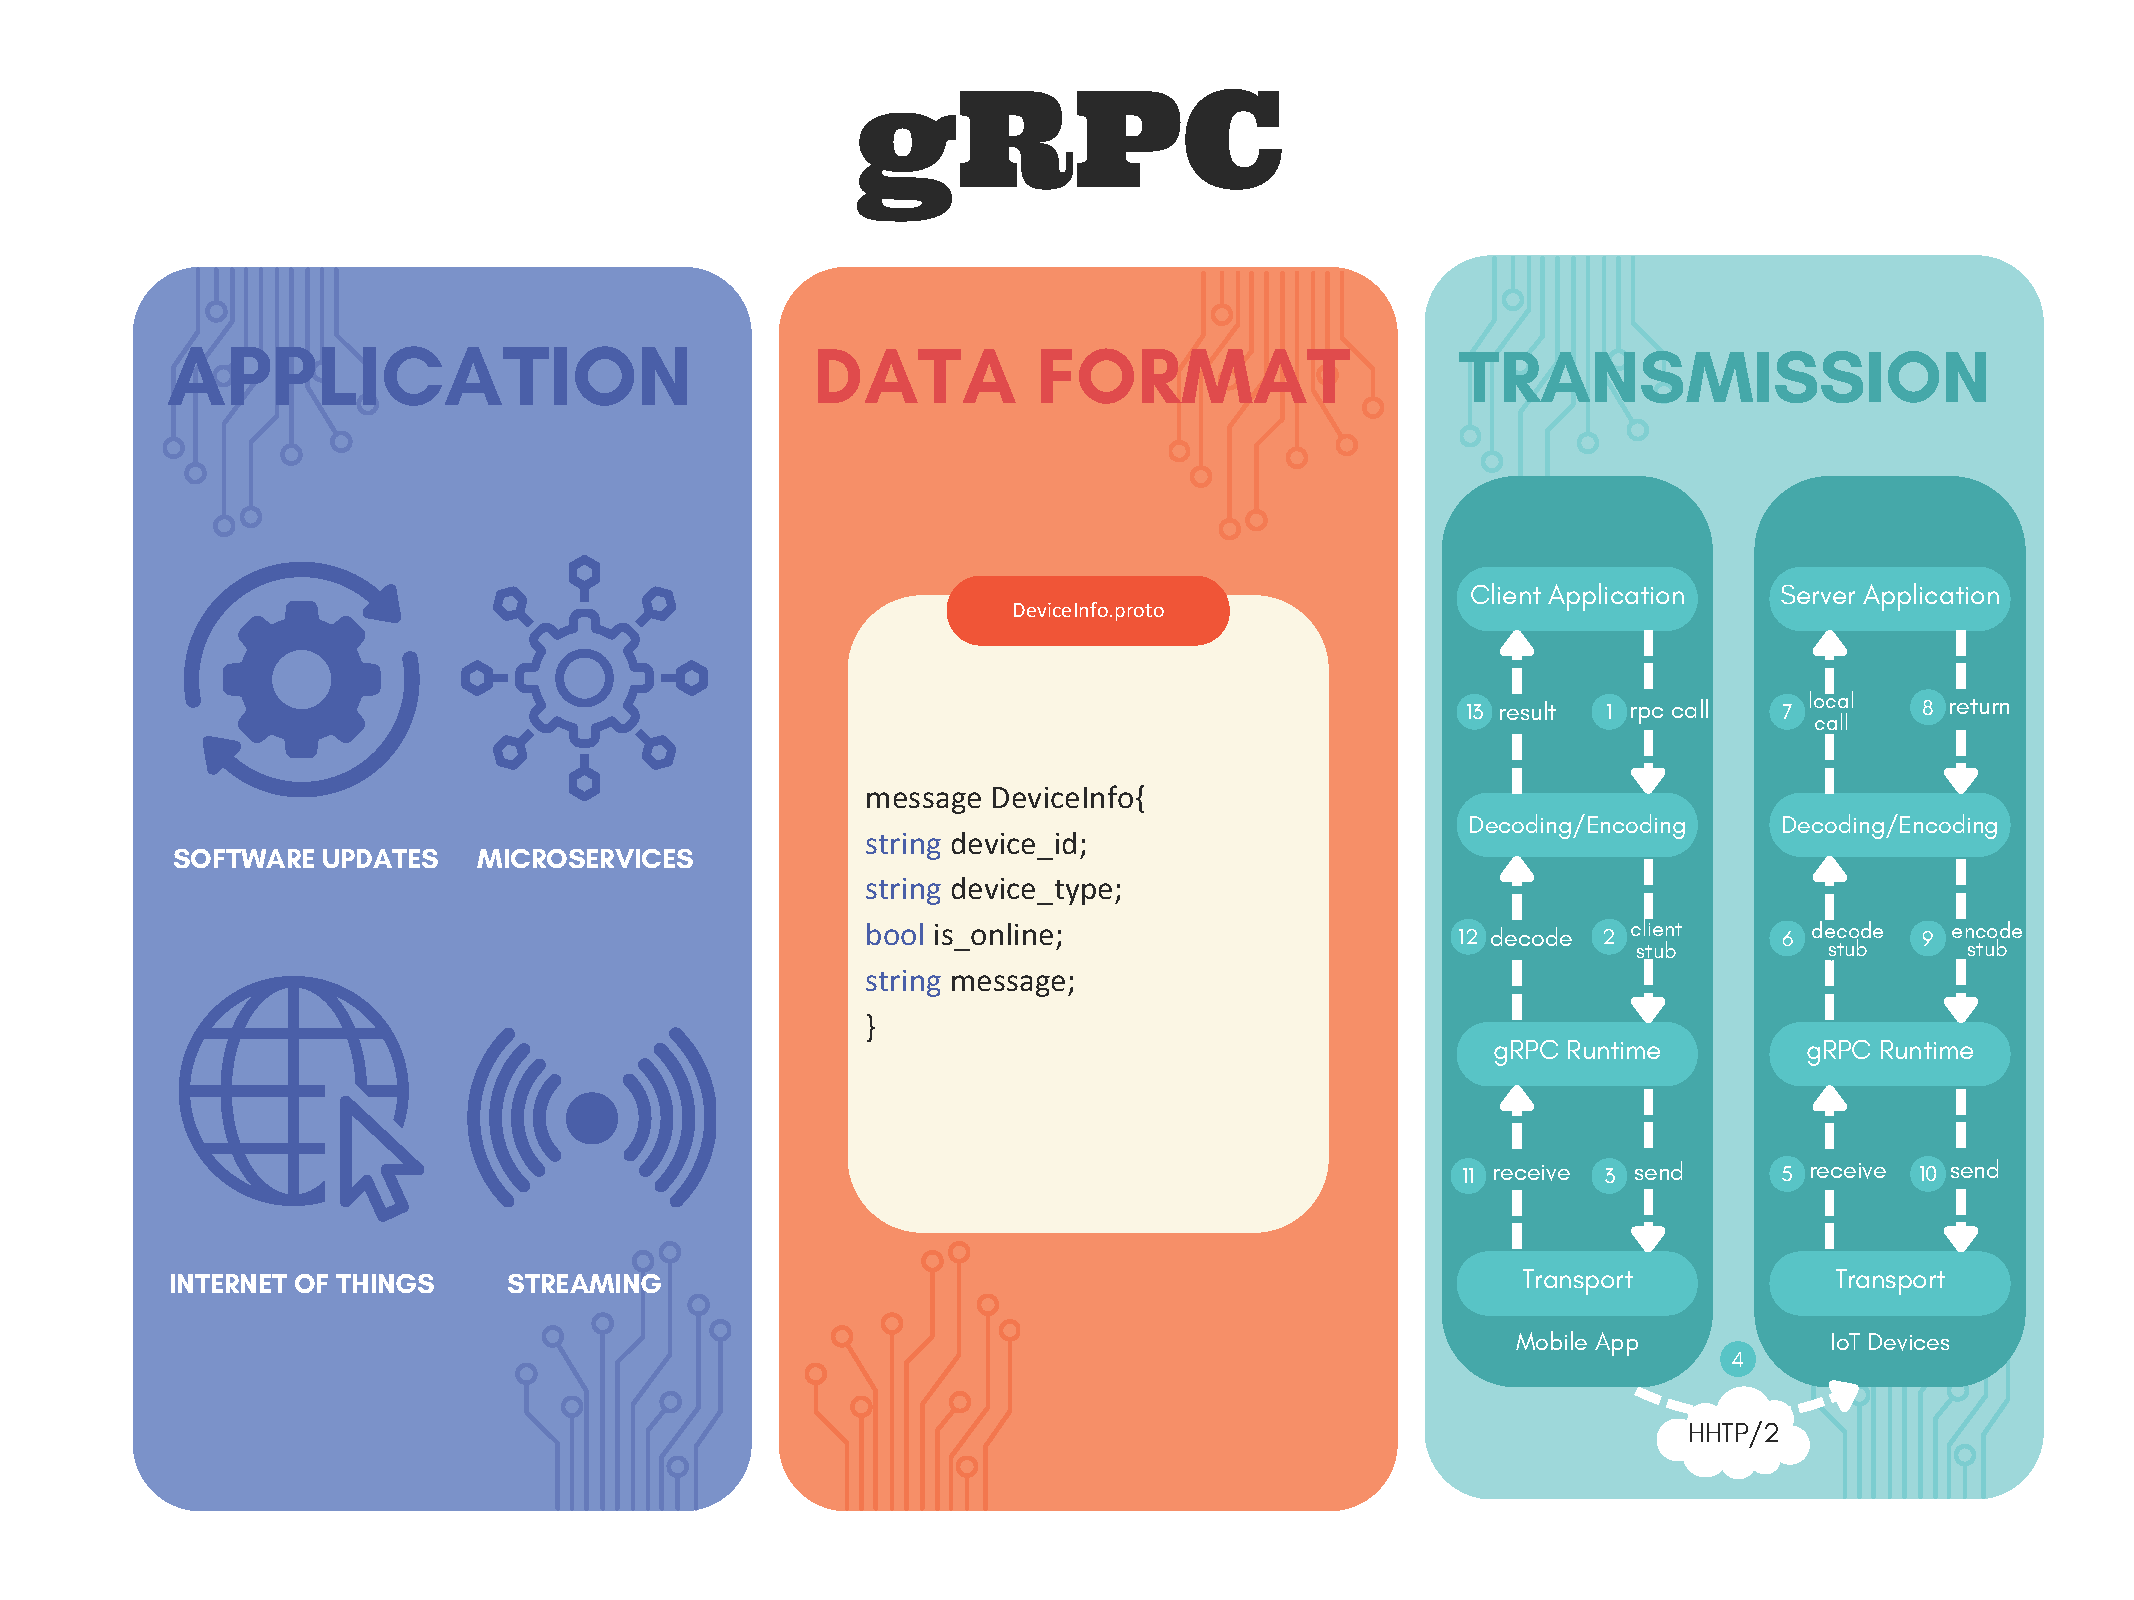 infographic showing three pieces of grpc: Application (with software updates, microservices, internet of things, and streaming), Data Format (with some code around deviceinfo), and Transmission (showing how client and server applications are connected via hhtp/2)